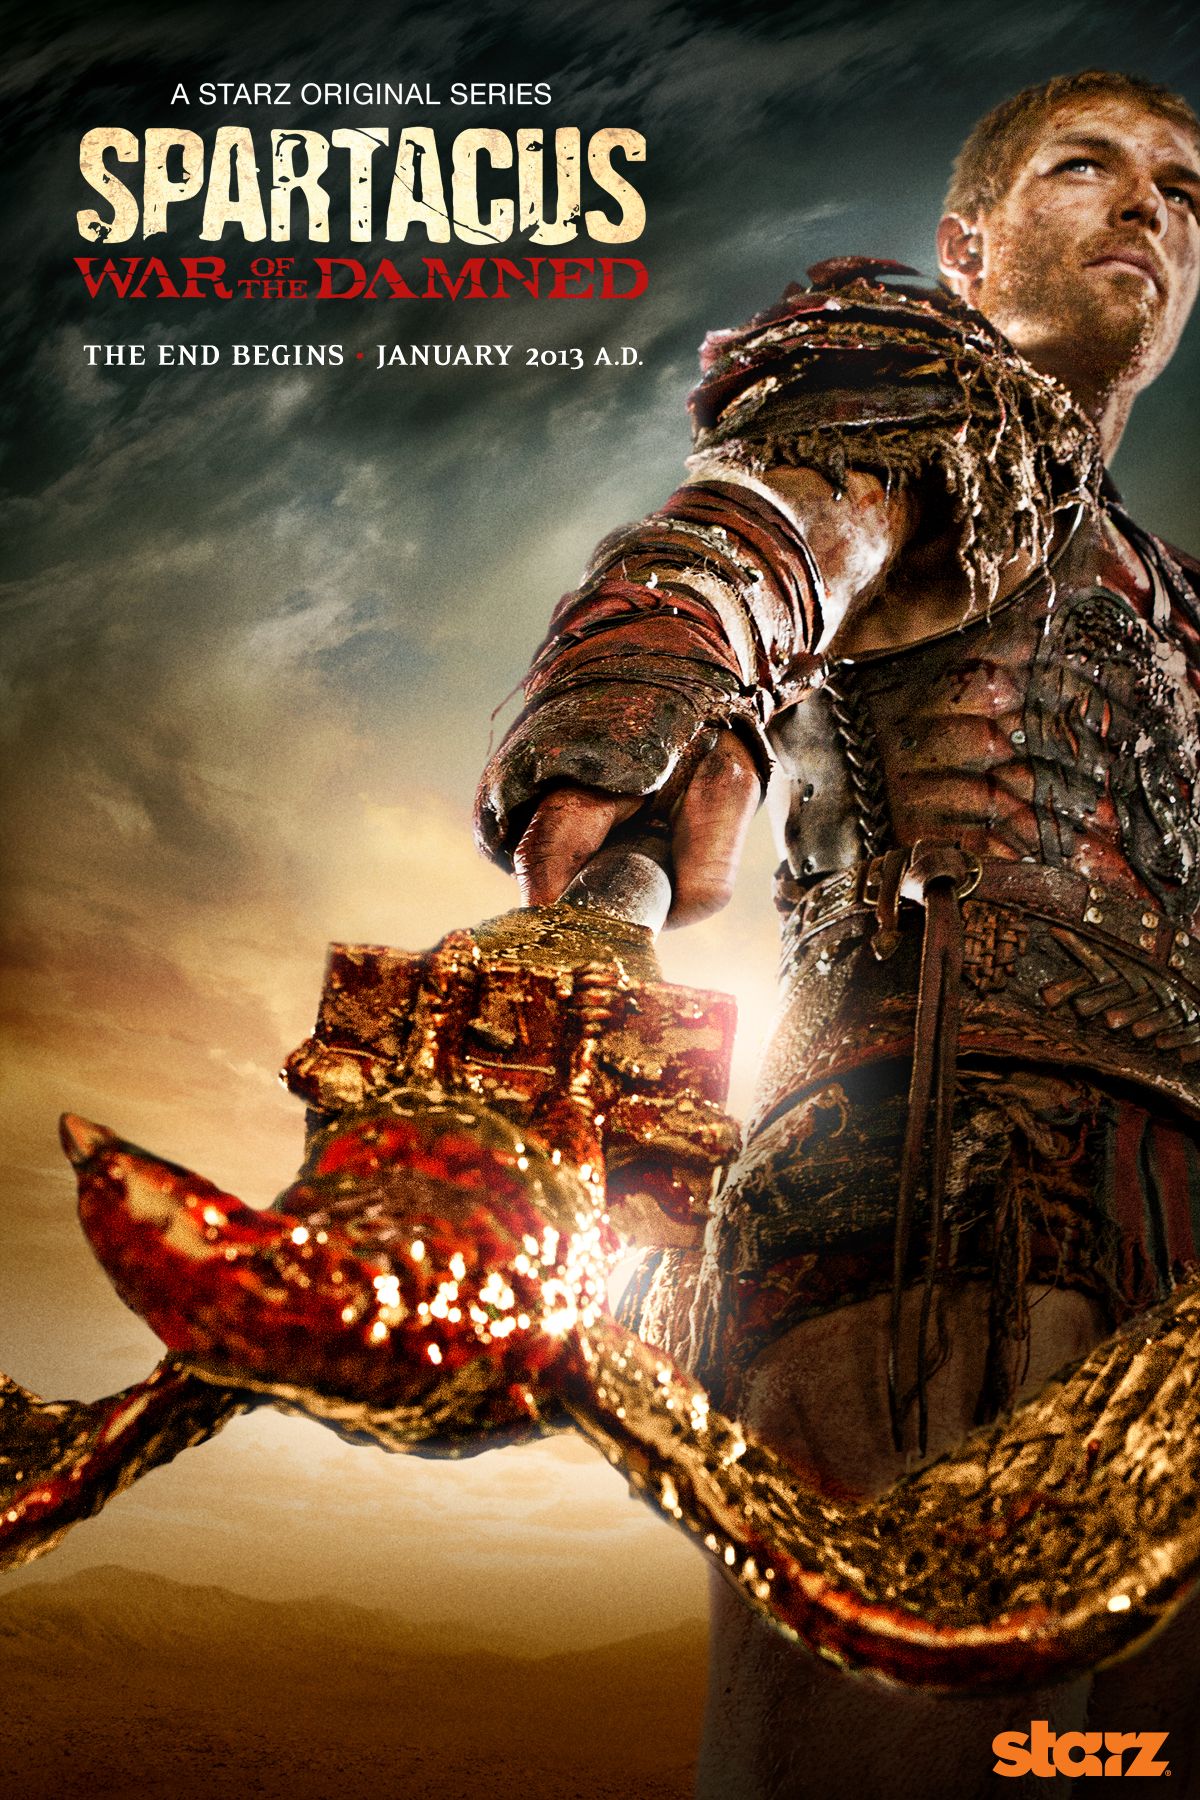 Spartacus War of the Damned Promo Art